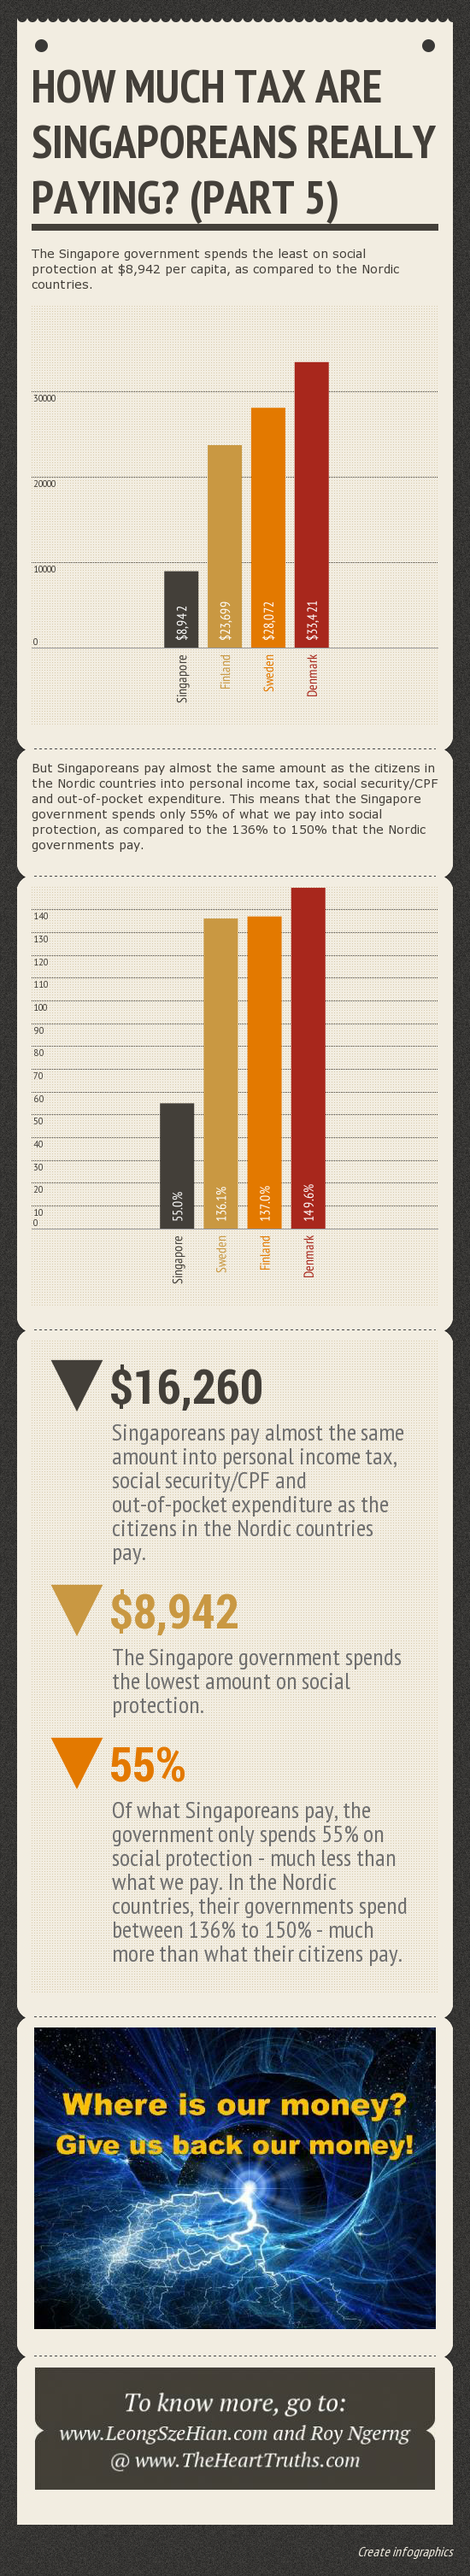 How Much Tax Are Singaporeans Really Paying Part 5